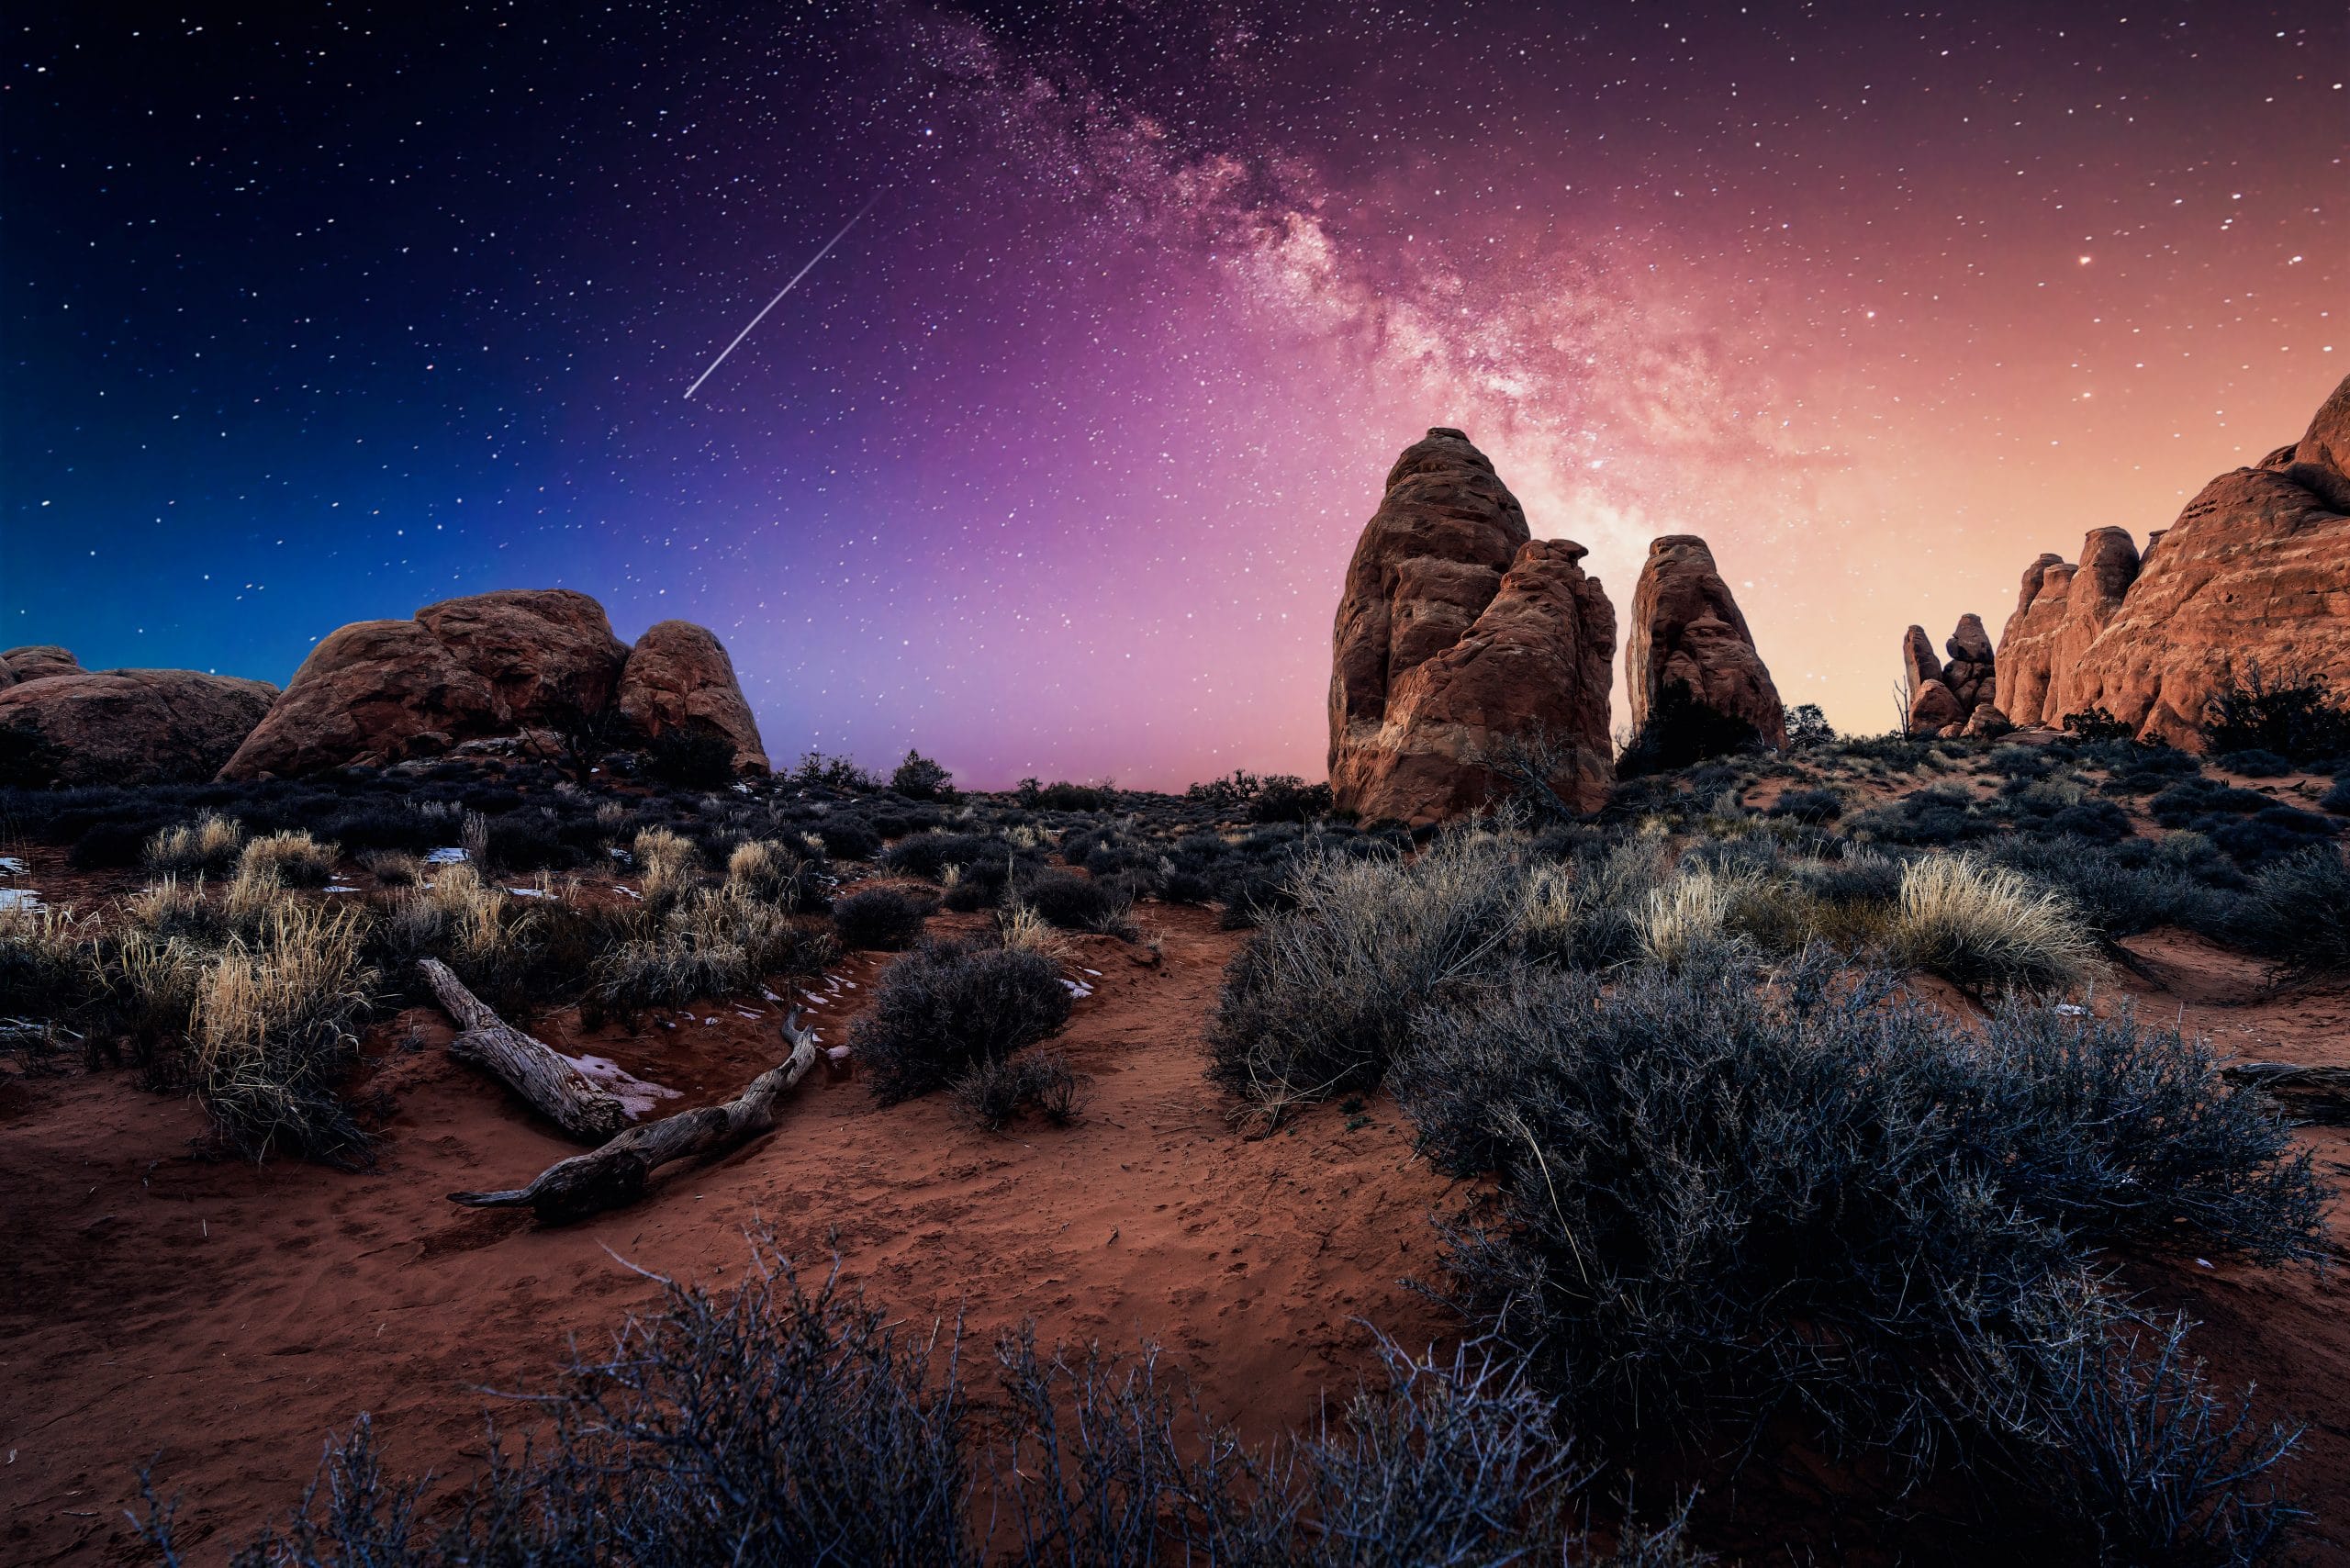 Shooting star at night with rock formations